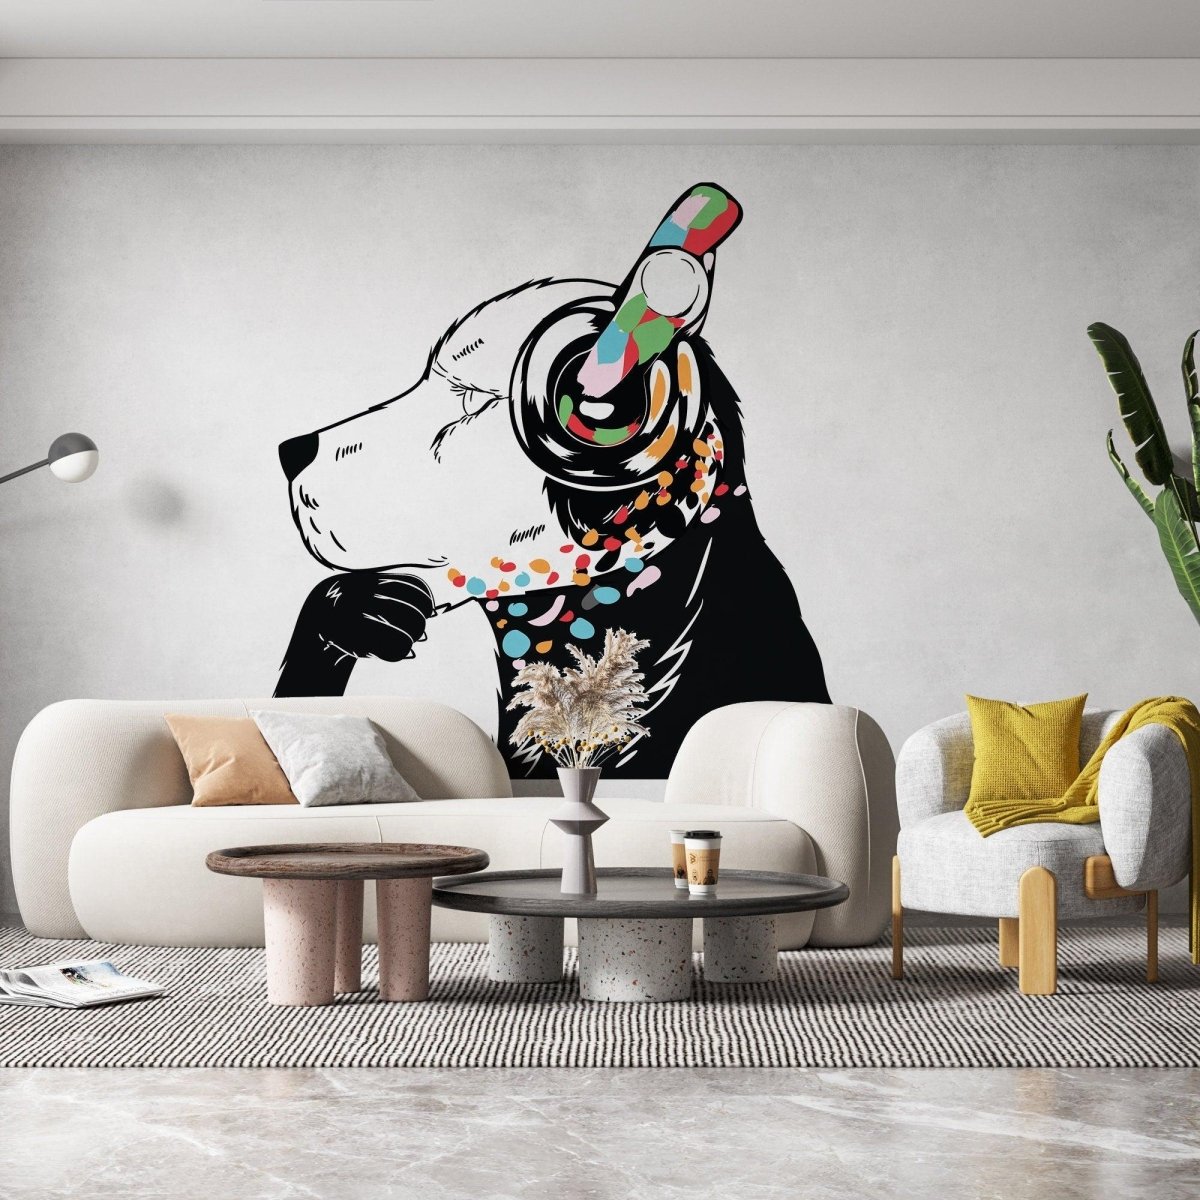 Banksy-inspired Canine Melody Wall Decal - Decords